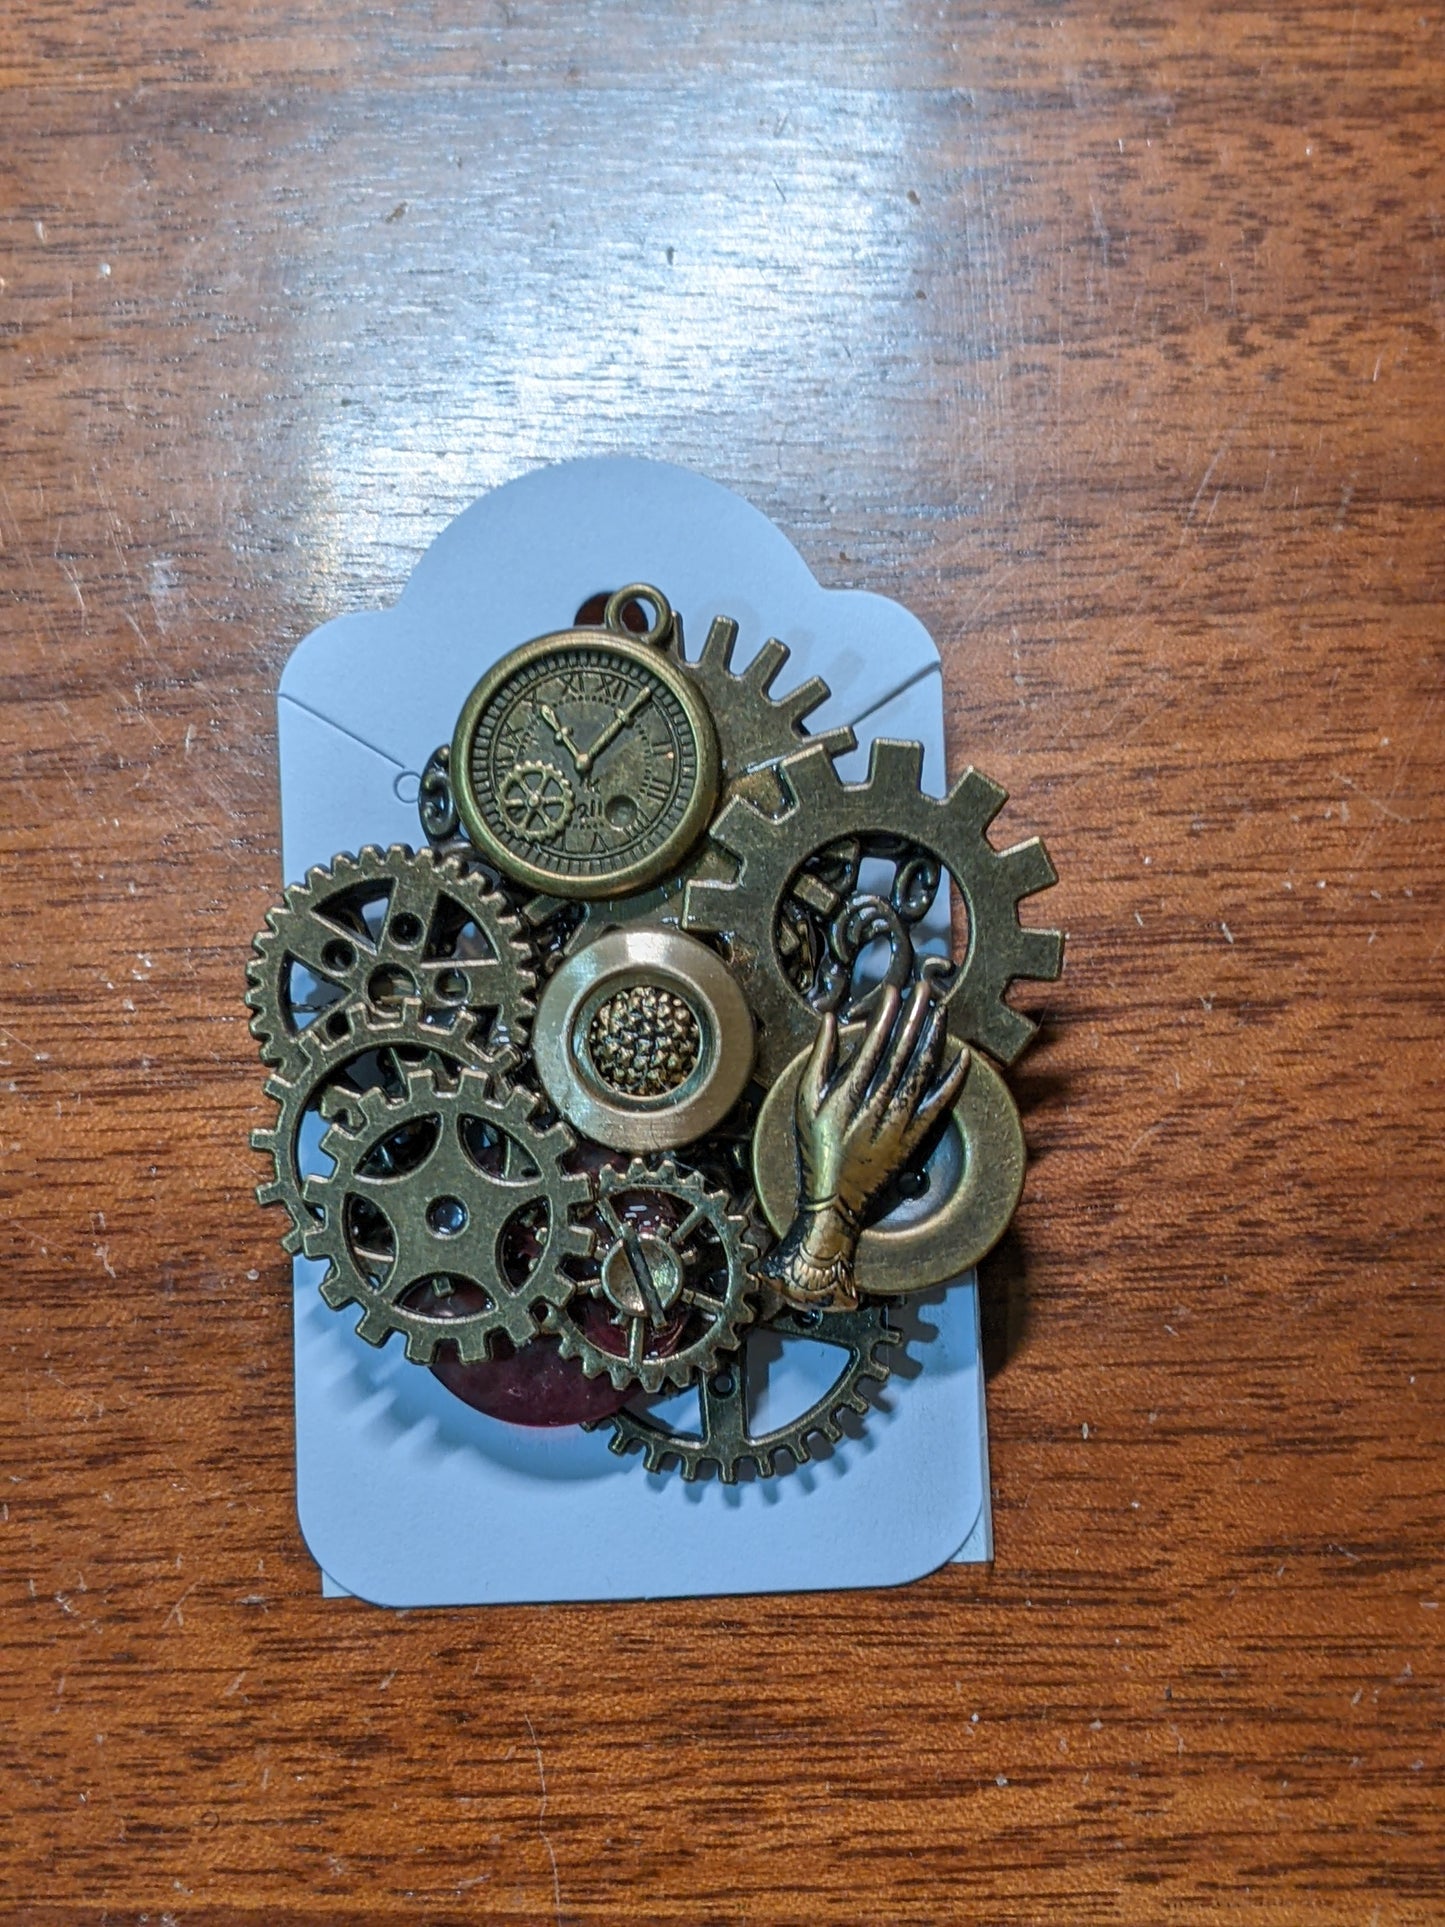 A90-Vintage Steampunk Themed Brooch-Unique Charm Pin! Brooch9